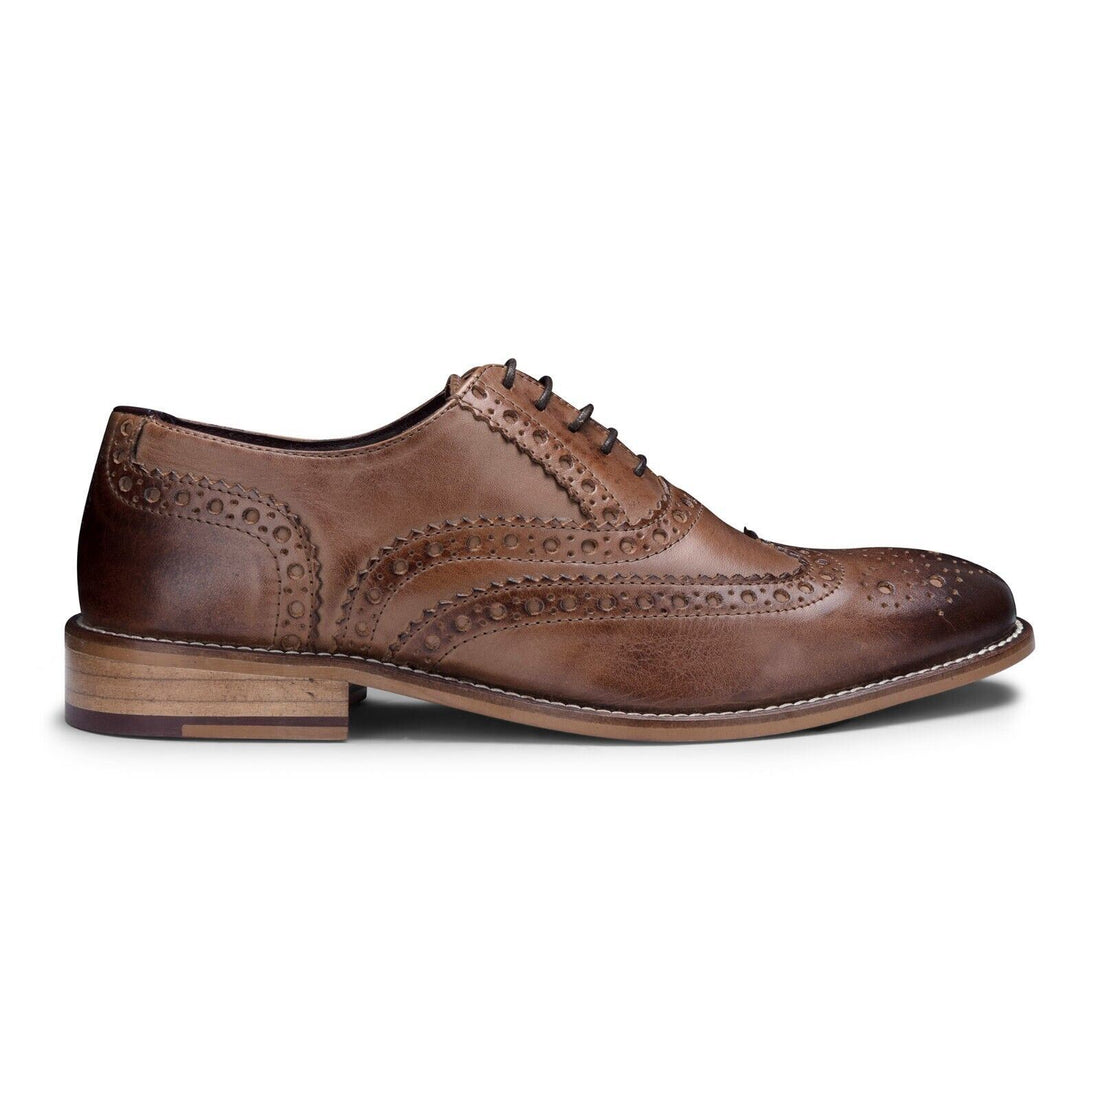 Mens Classic Oxford Chestnut-Brown Leather Gatsby Brogue Shoes - Upperclass Fashions 